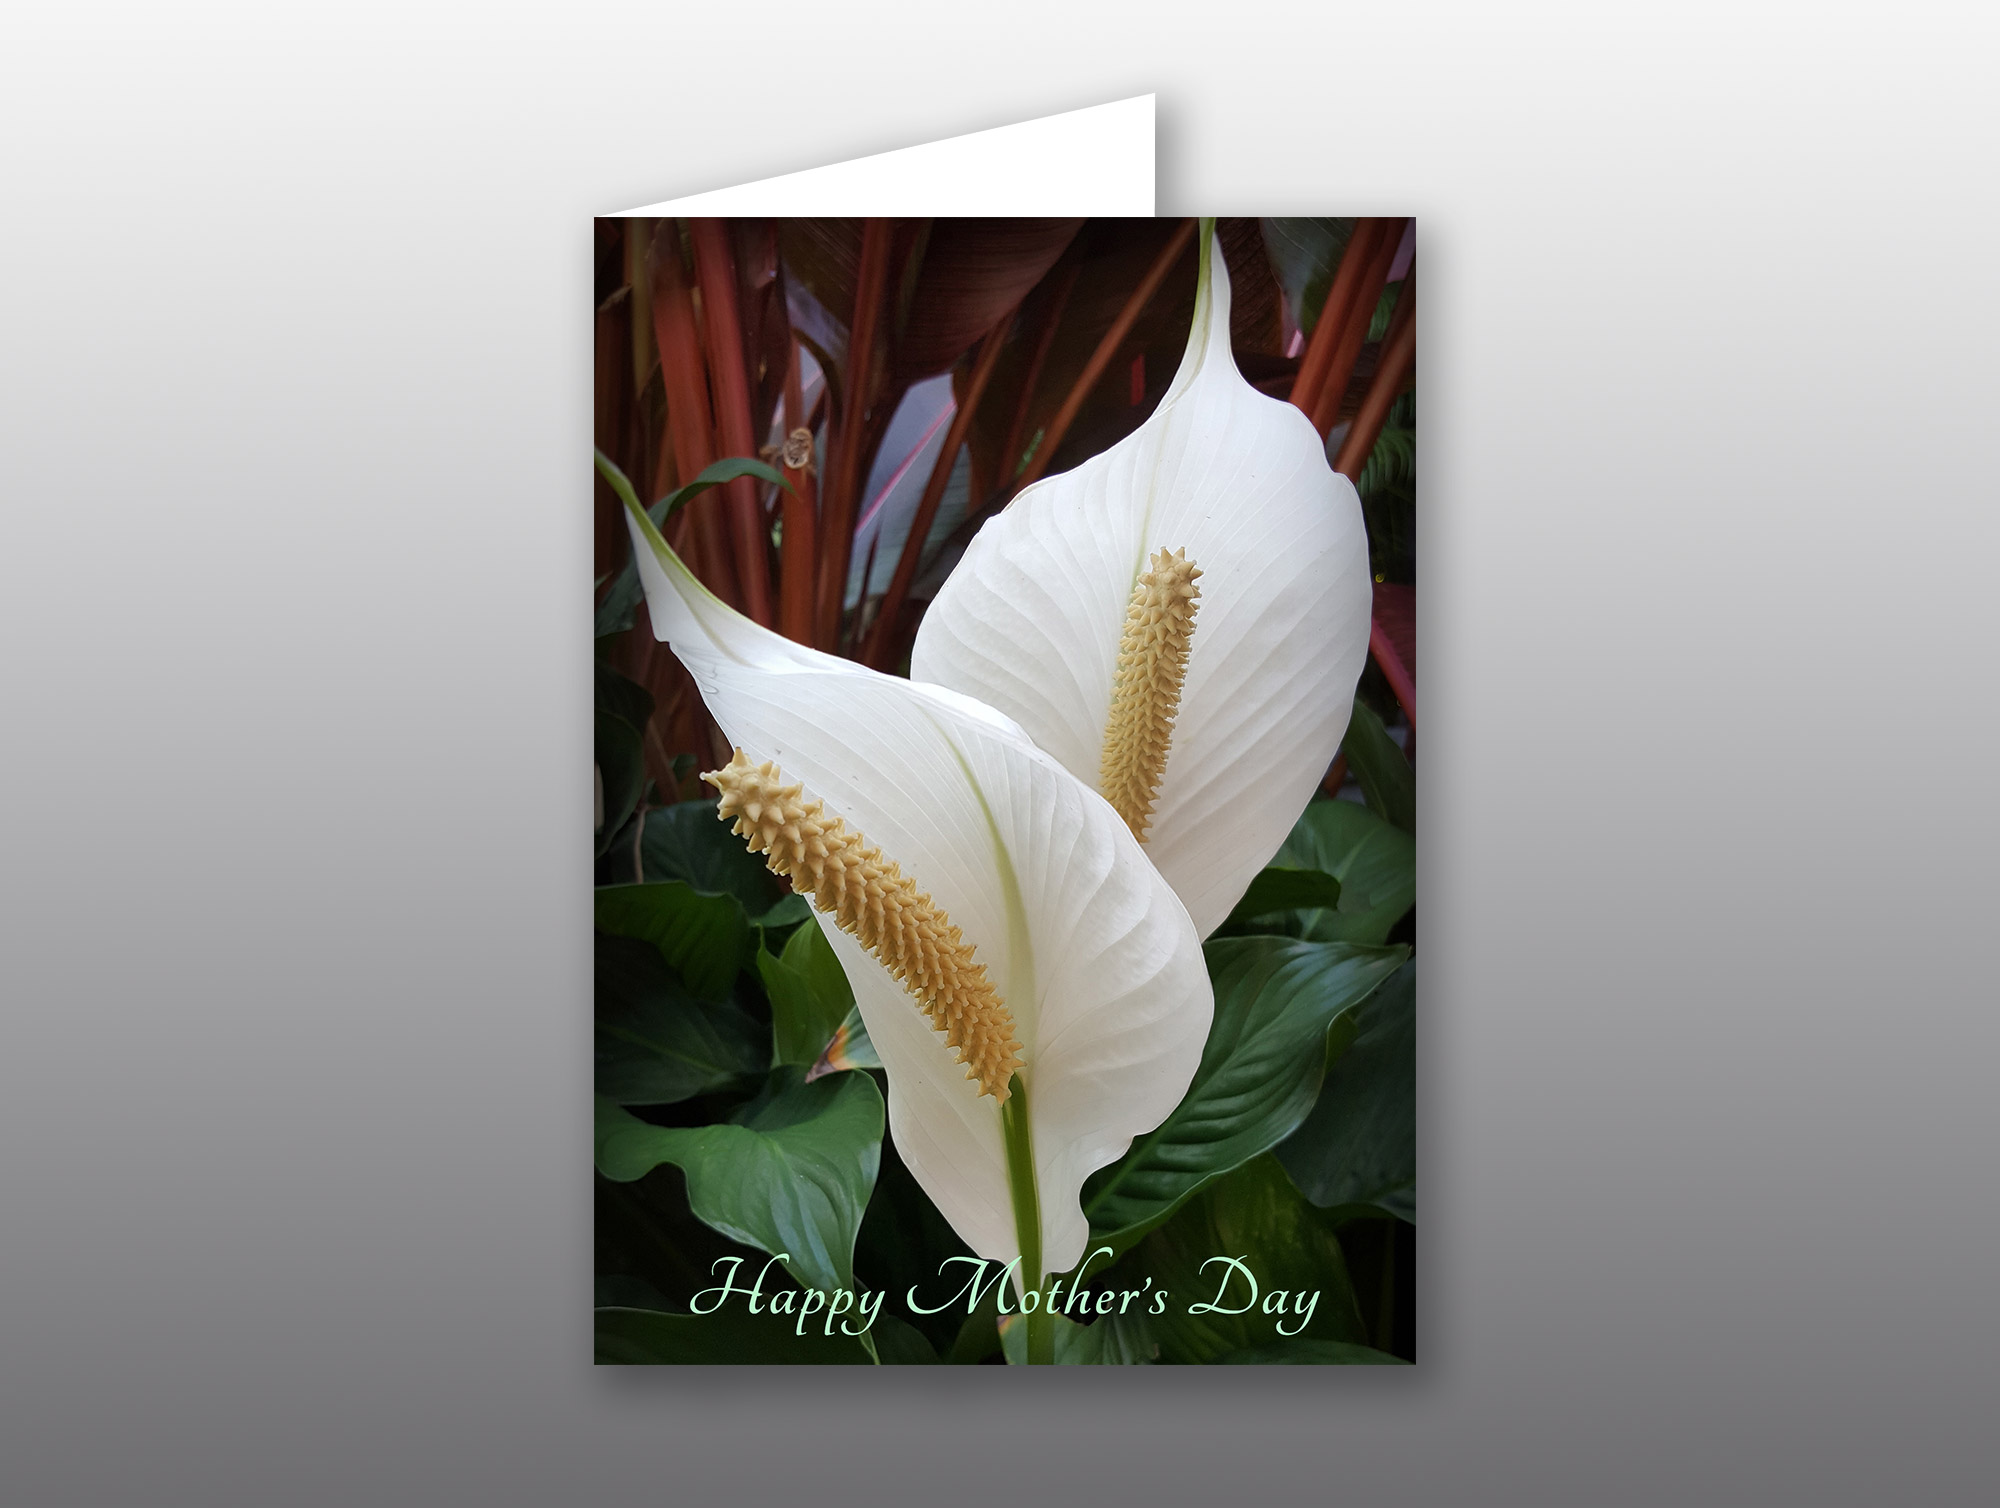 Spathiphyllum Flower - Moment of Perception Photography